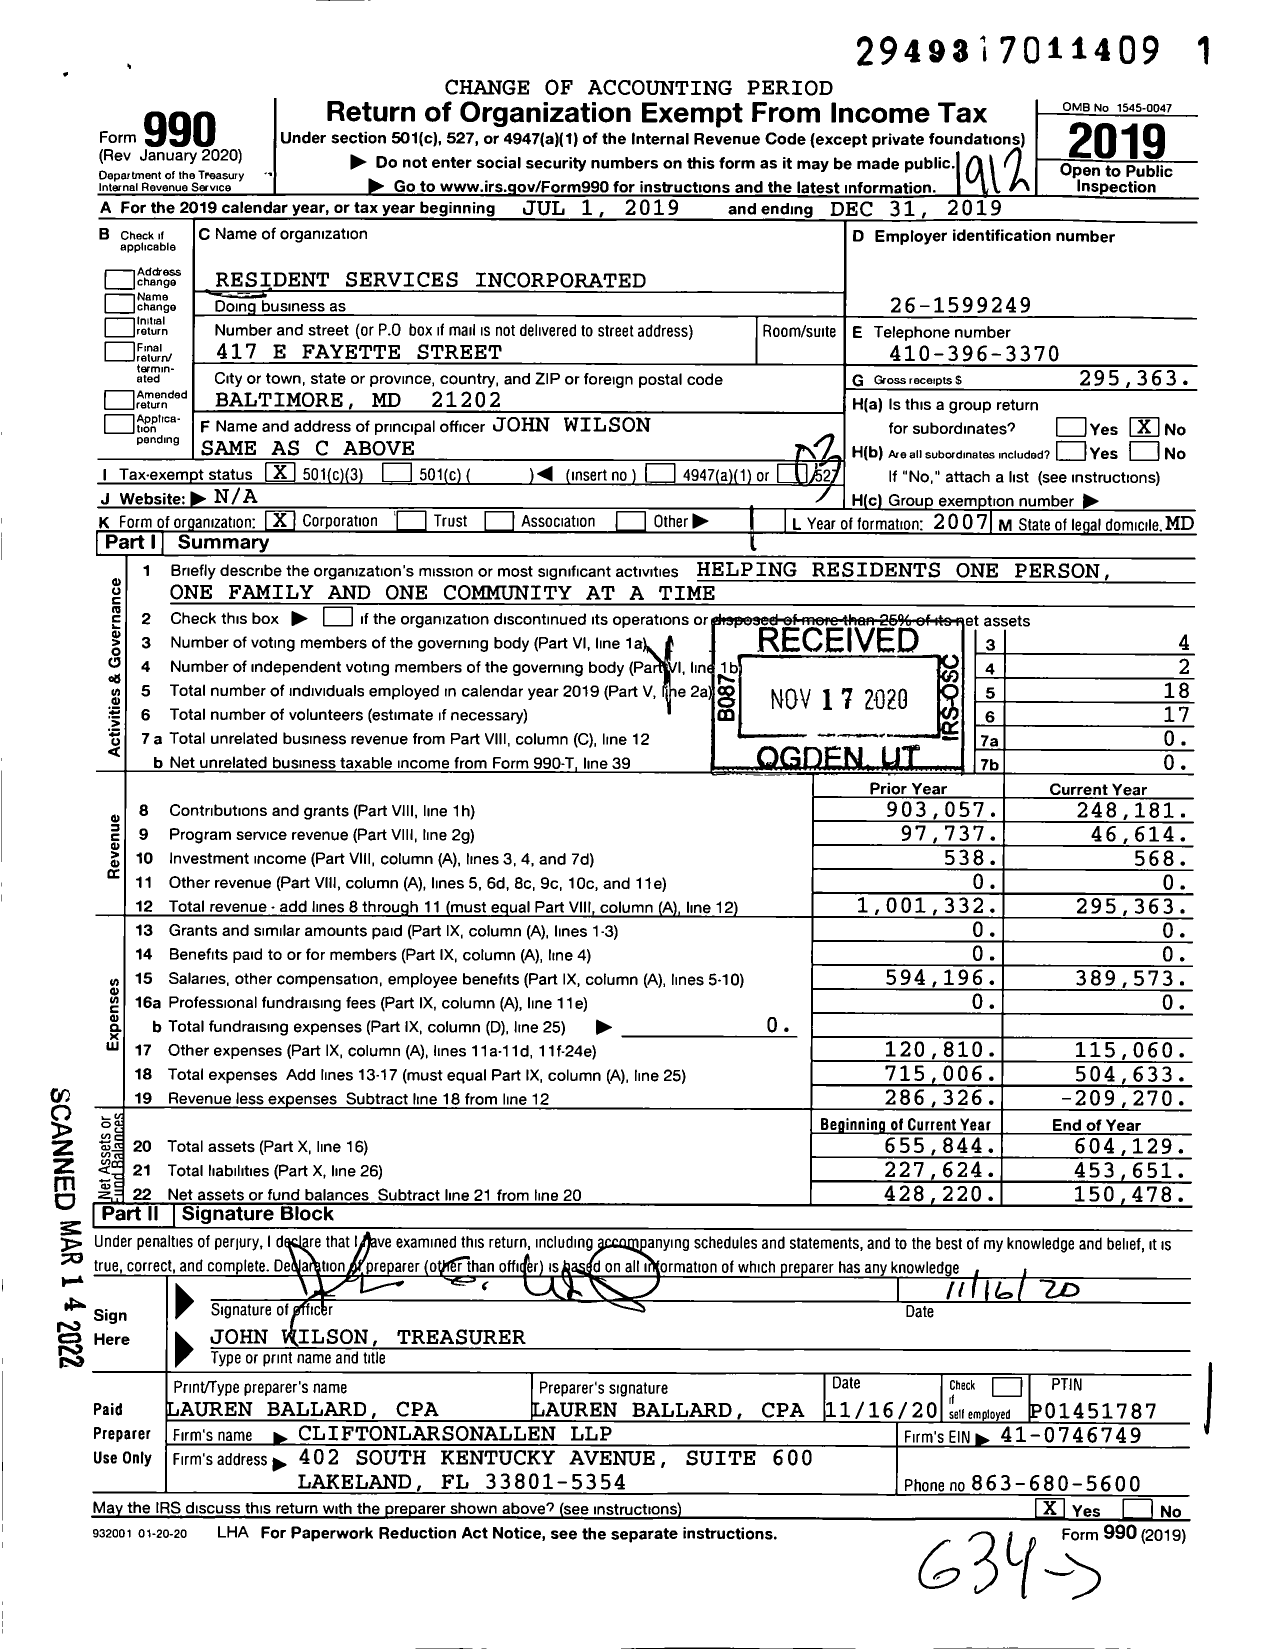 Image of first page of 2019 Form 990 for Resident Services Incorporated